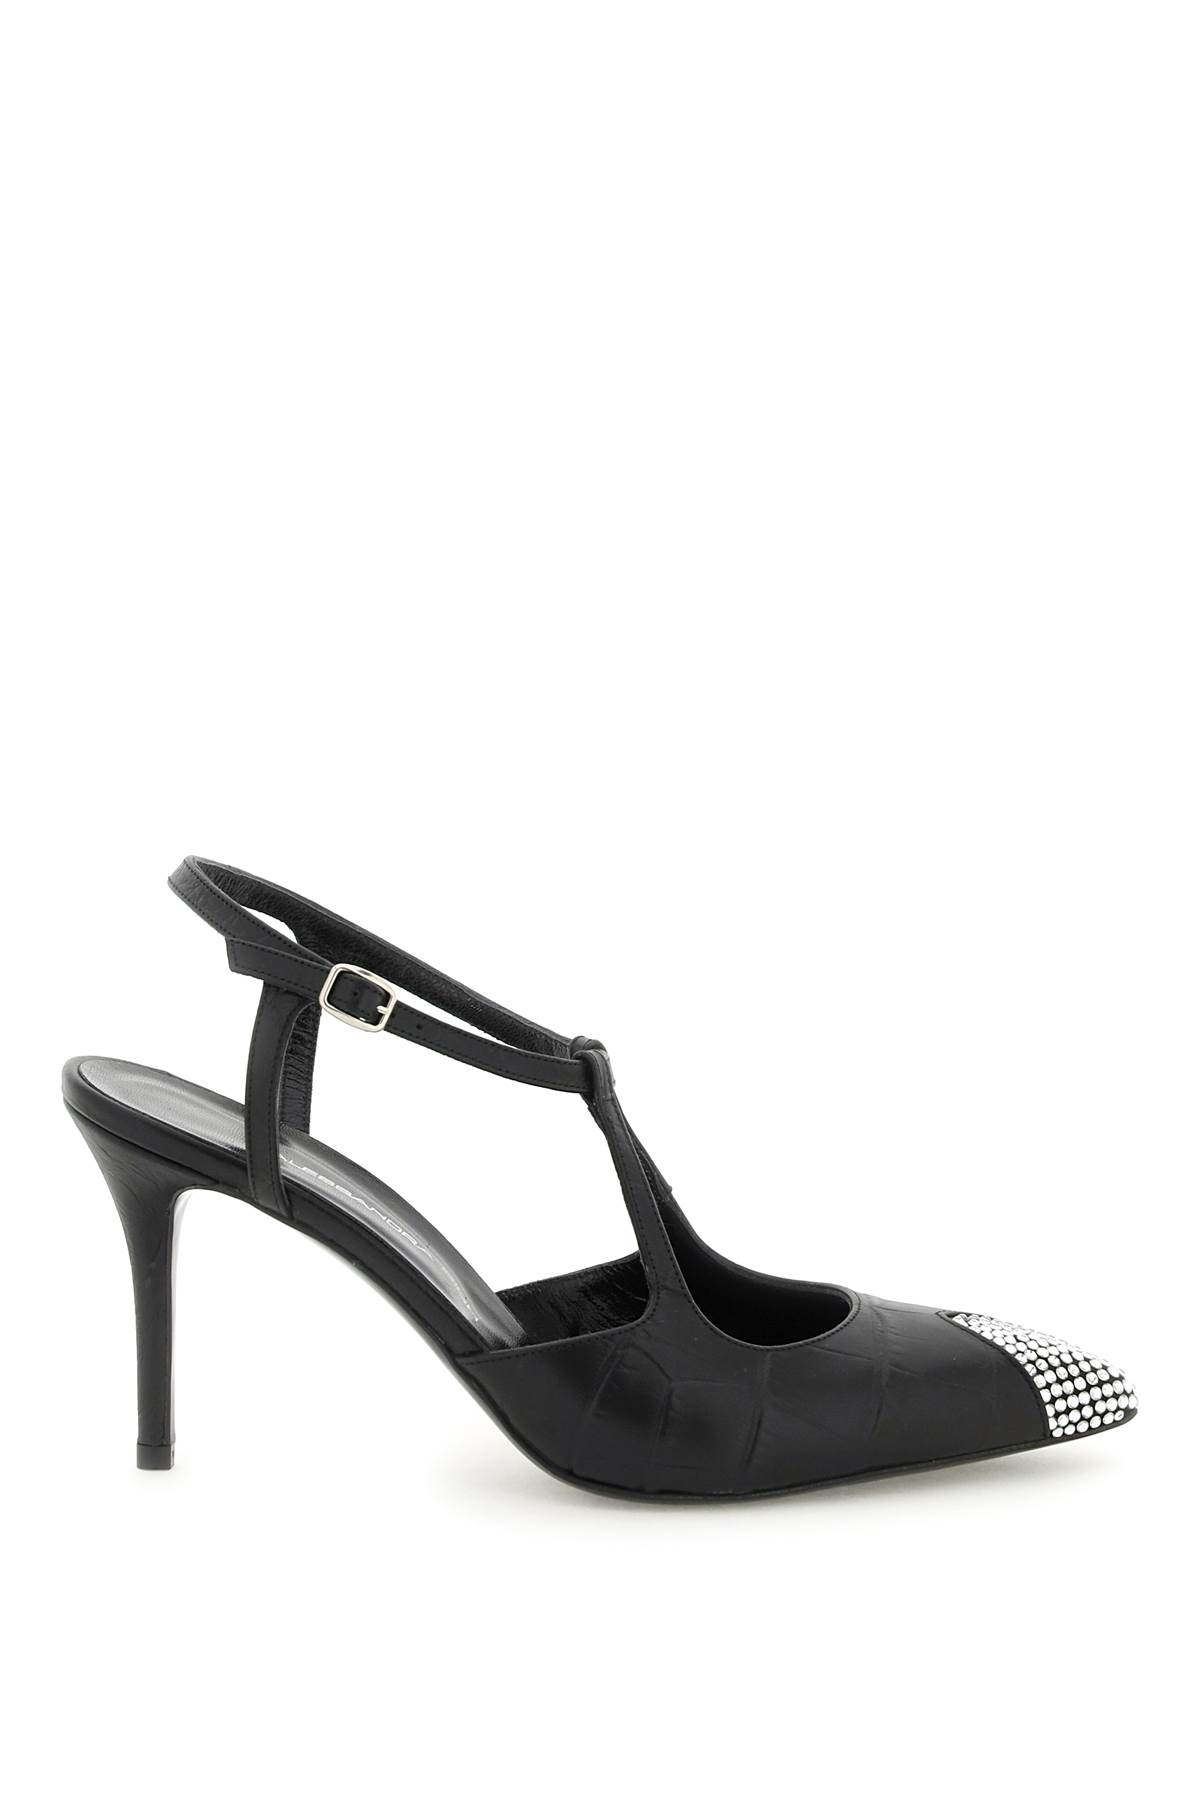 ALESSANDRA RICH LEATHER SLINGBACK PUMPS WITH CRYSTAL POINT